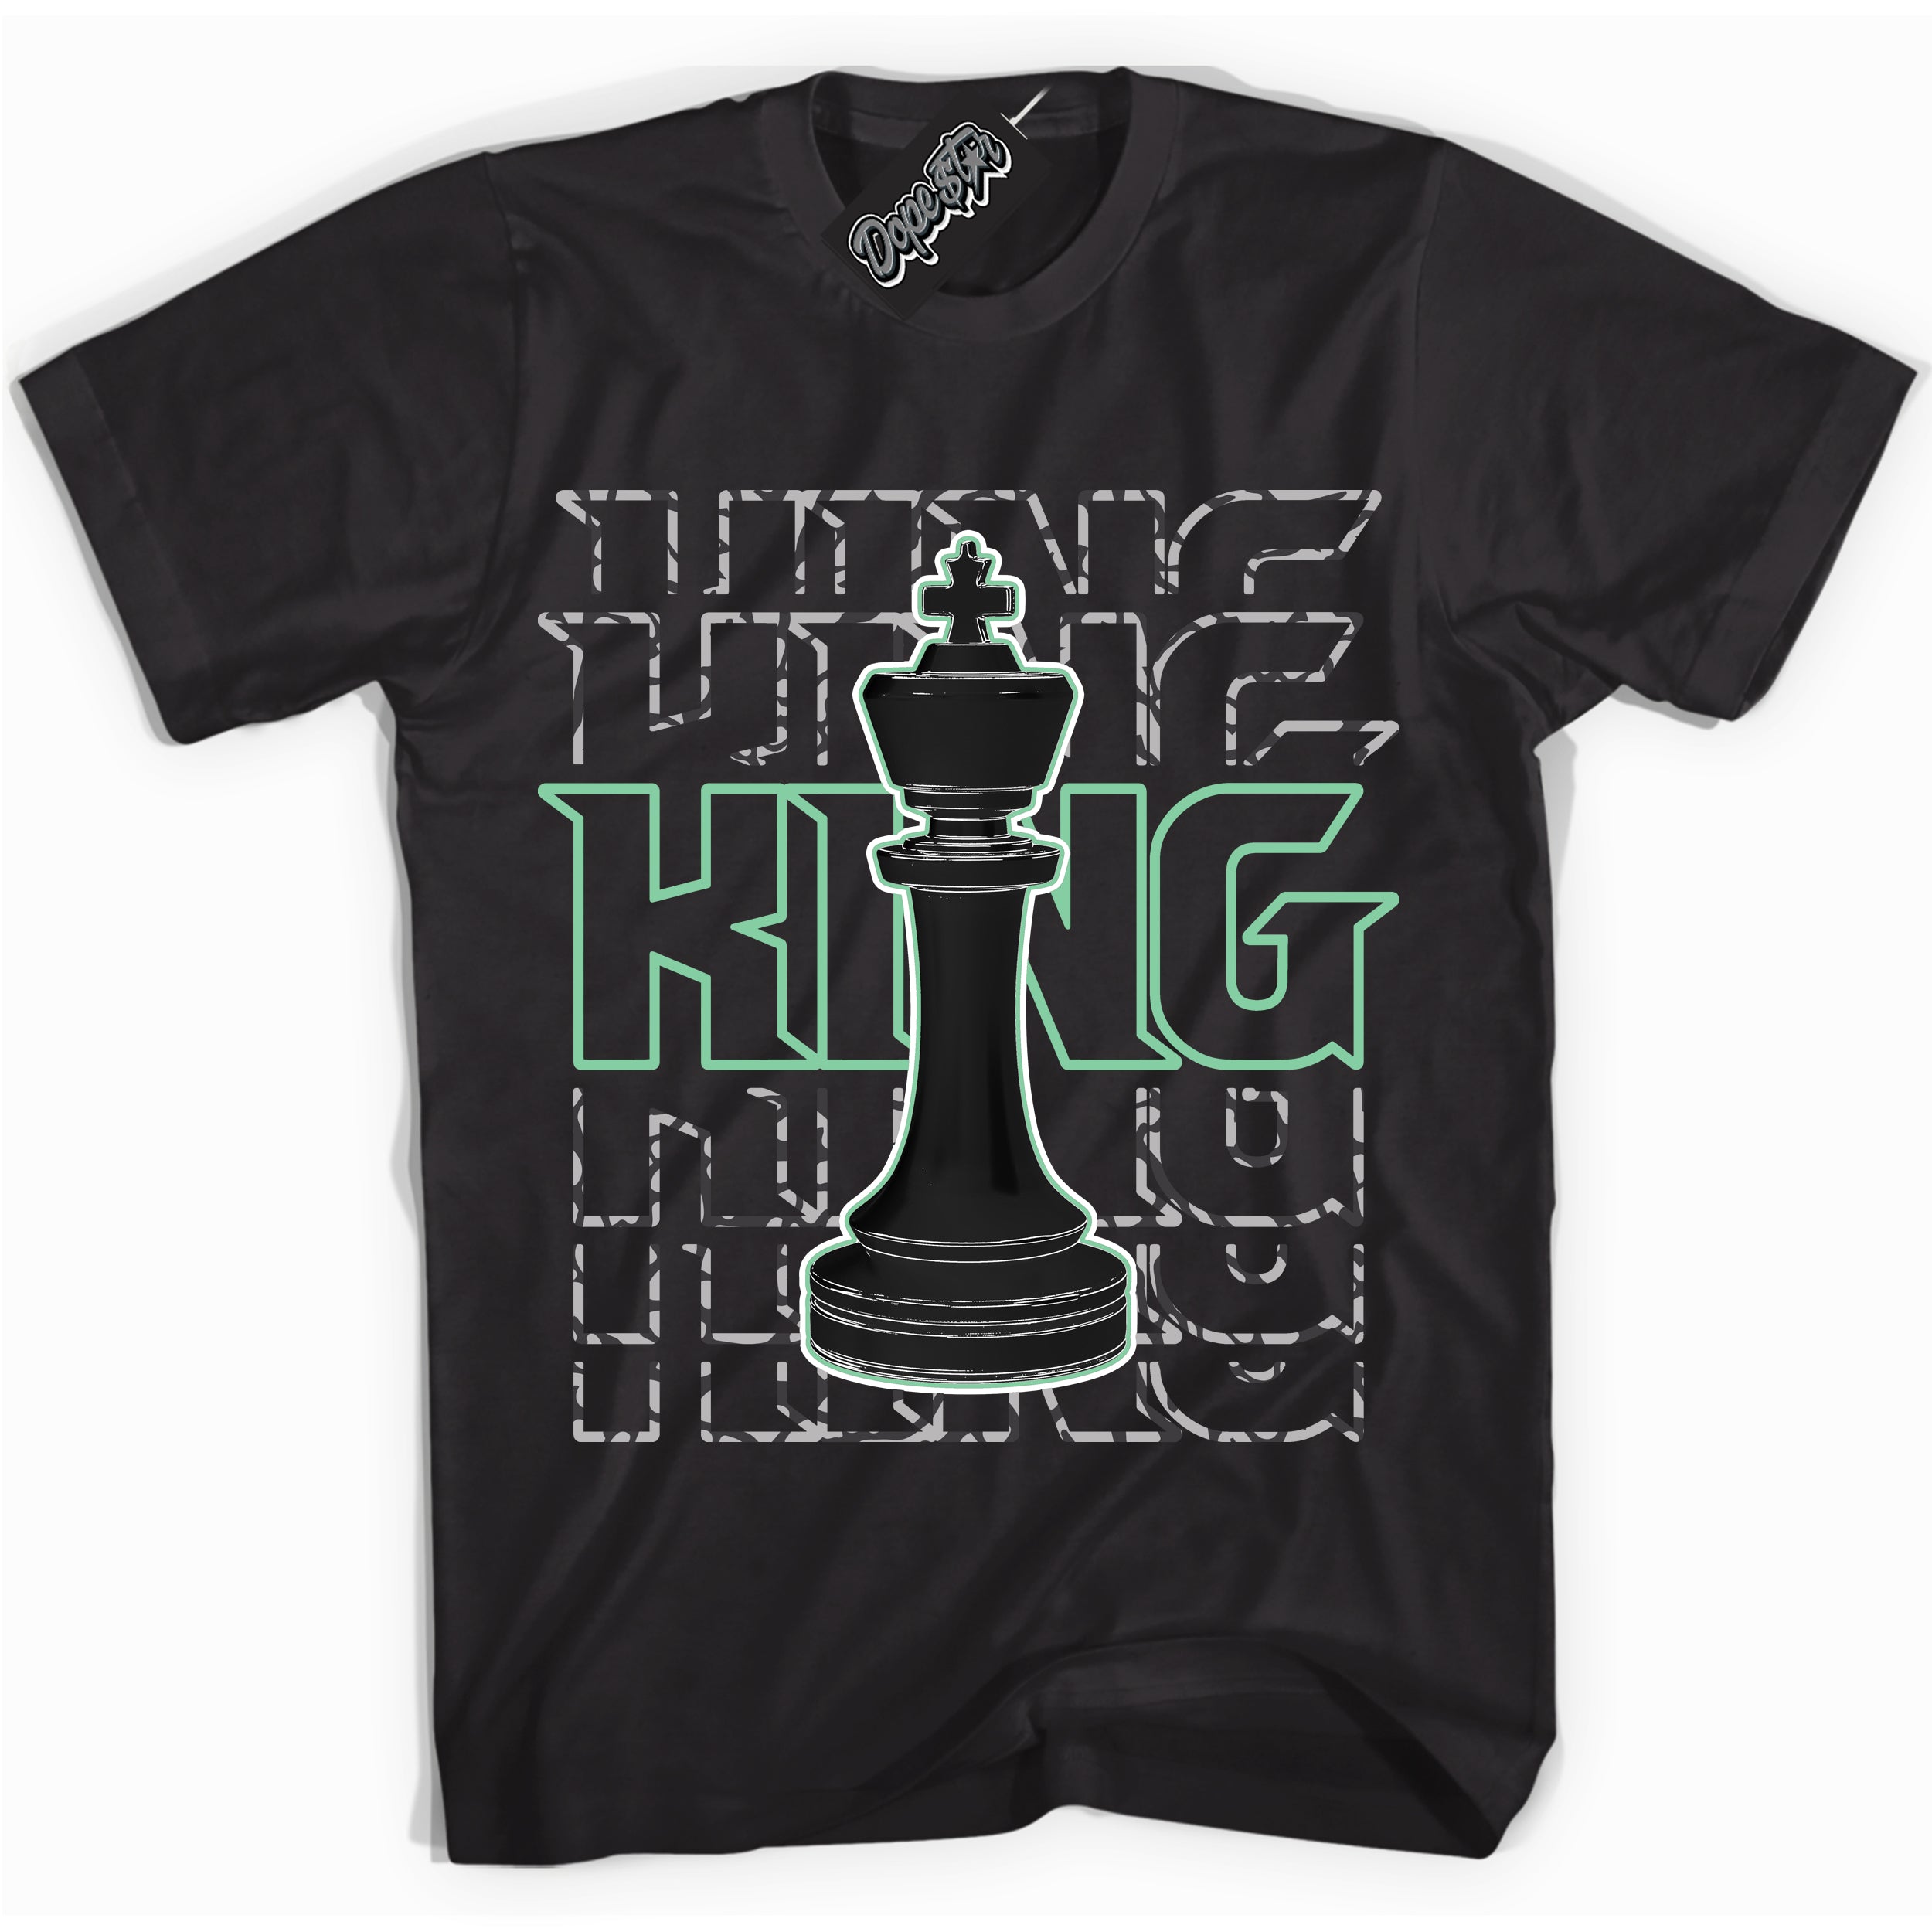 Cool Black graphic tee with “ King Chess ” design, that perfectly matches Green Glow 3s sneakers 